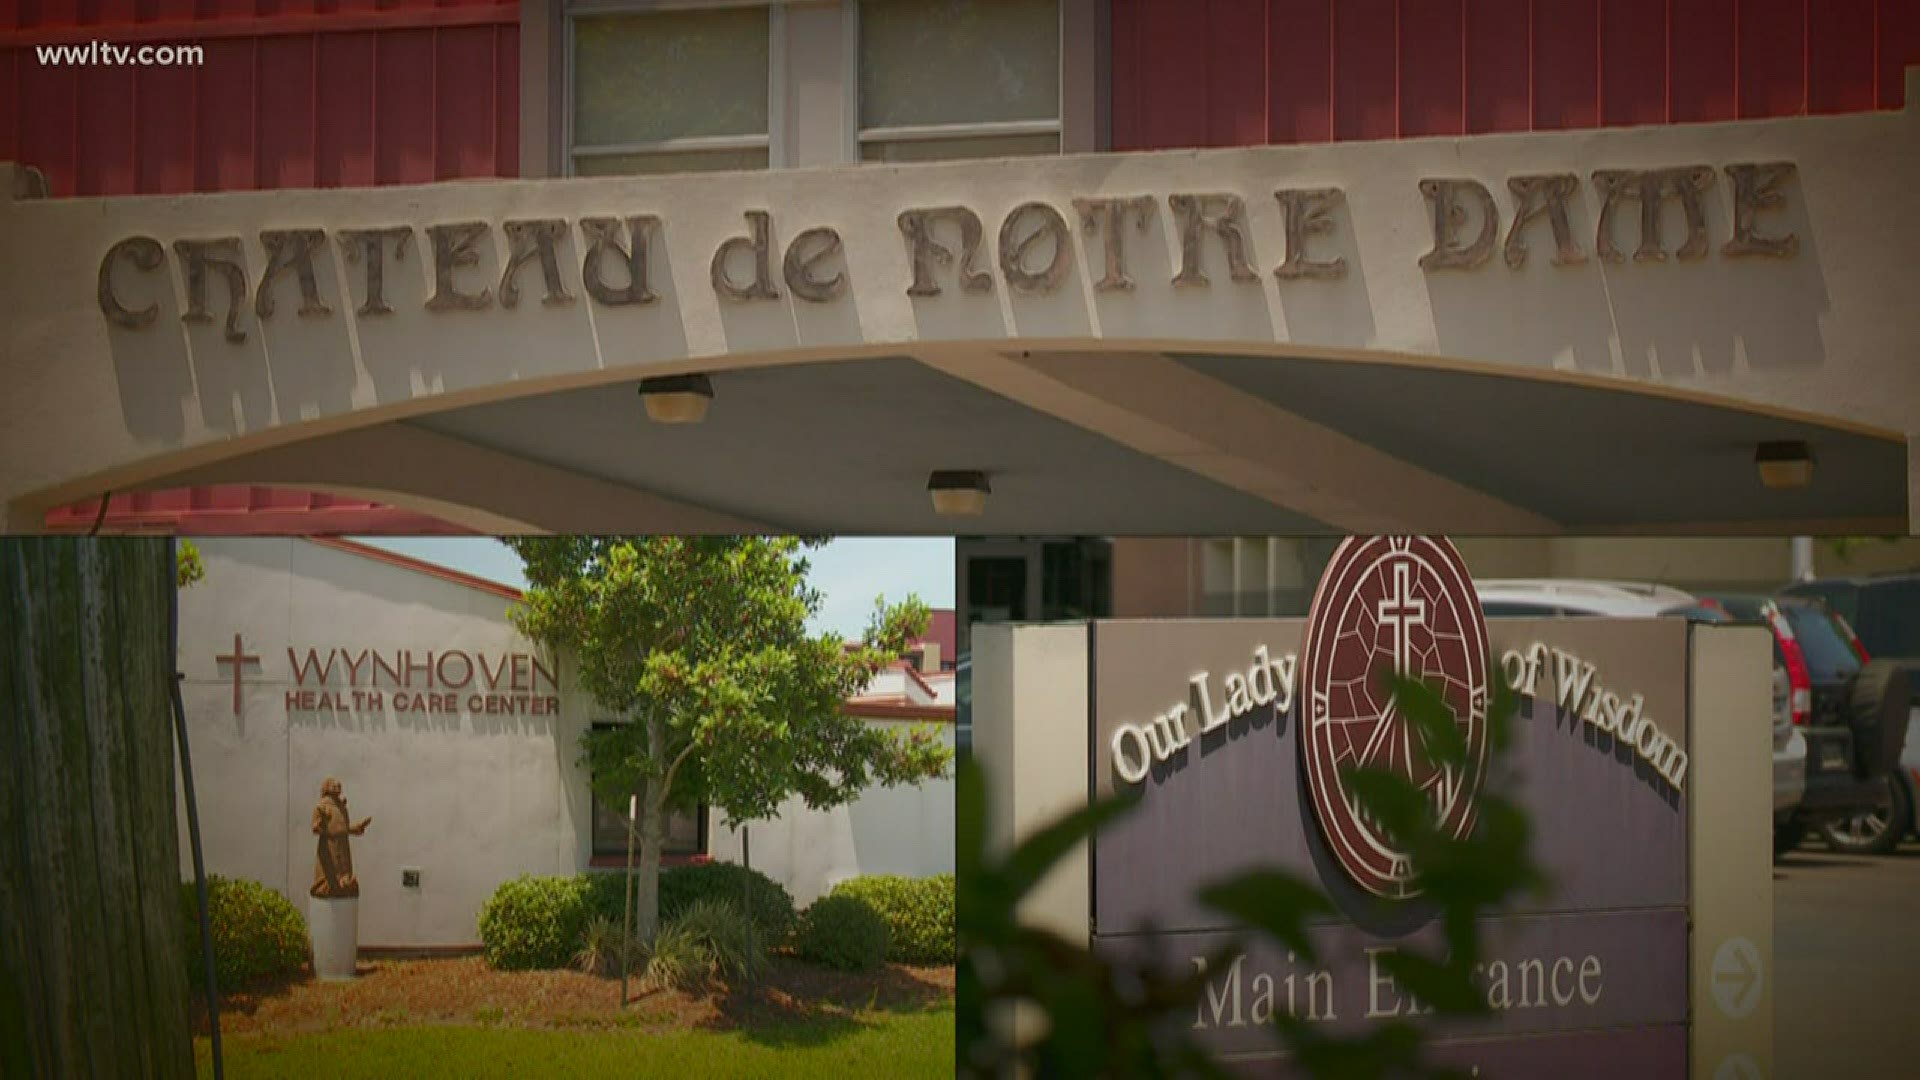 After six weeks of not reporting them, the Louisiana Department of Health is again releasing the number of coronavirus cases and deaths in state nursing homes.